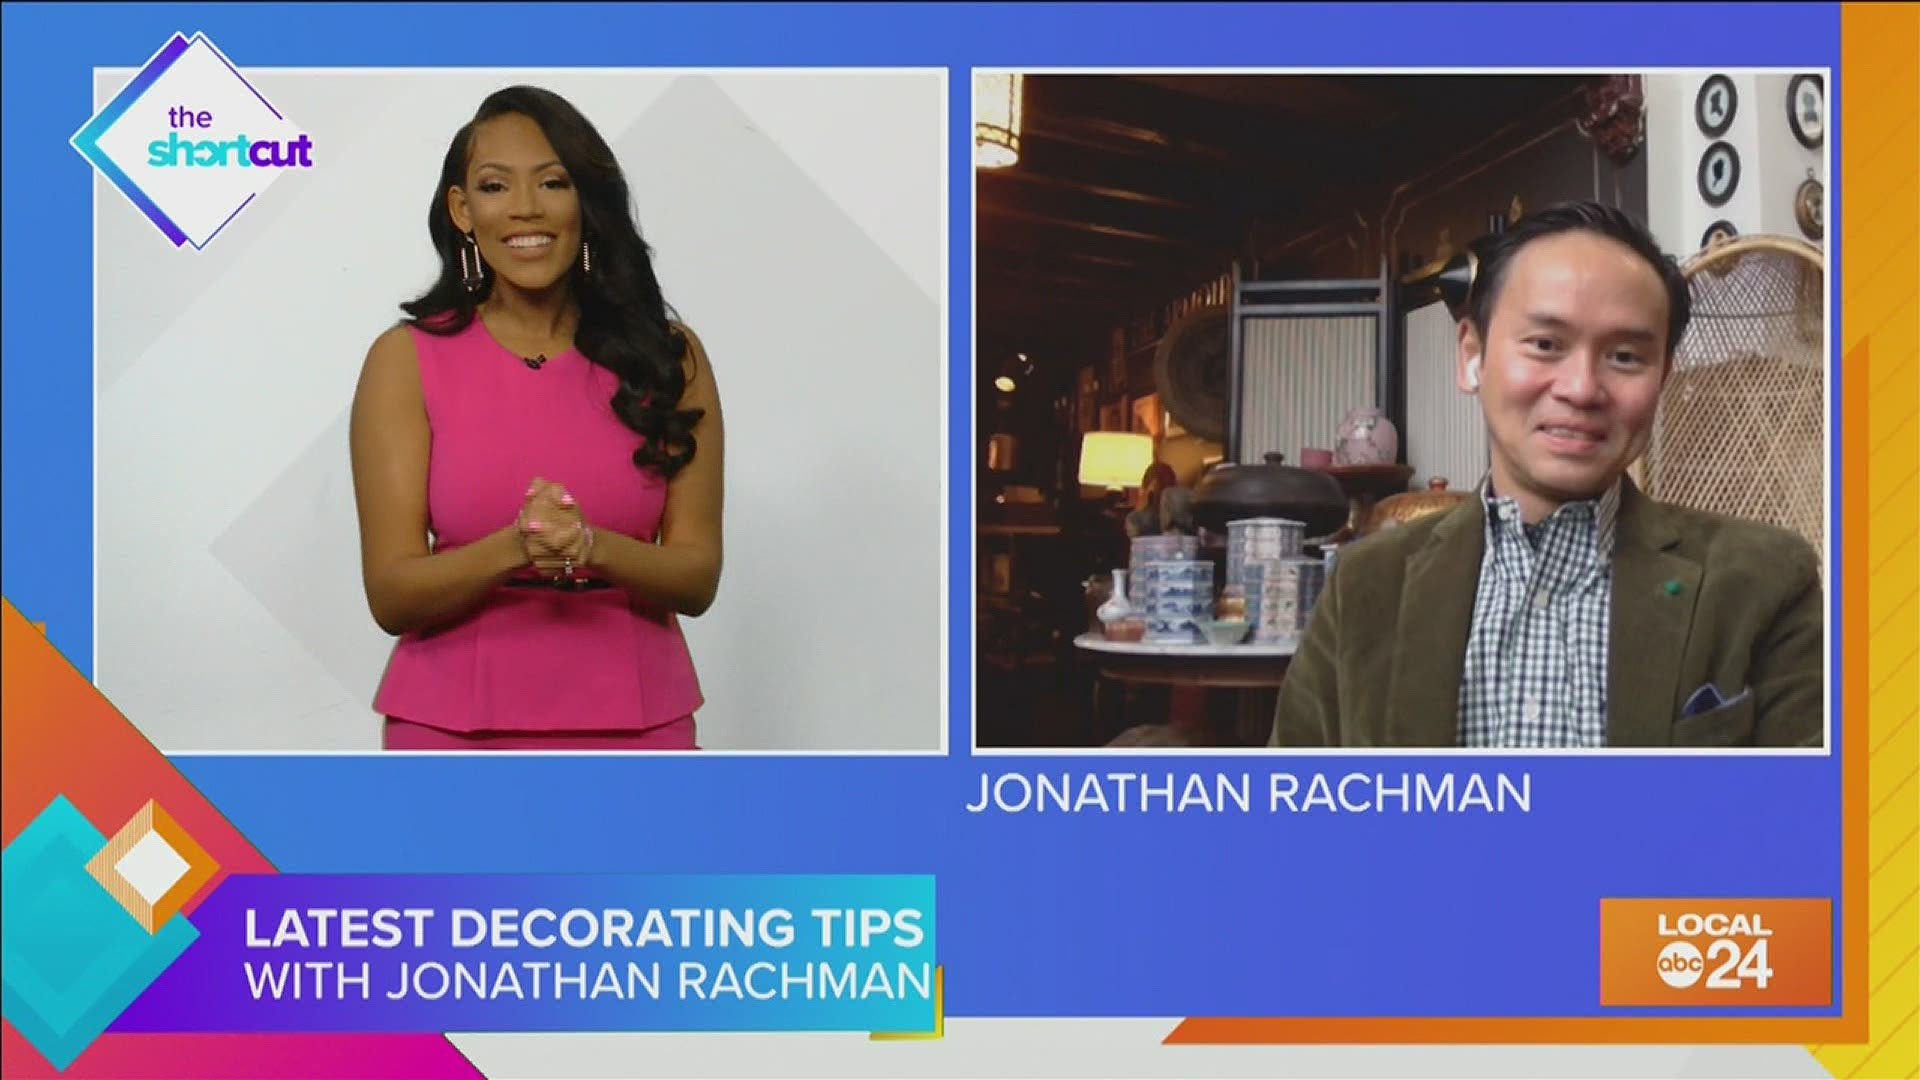 Check out the latest decorating trends and get tips from Jonathan Rachman. Join Sydney Neely on The Shortcut.